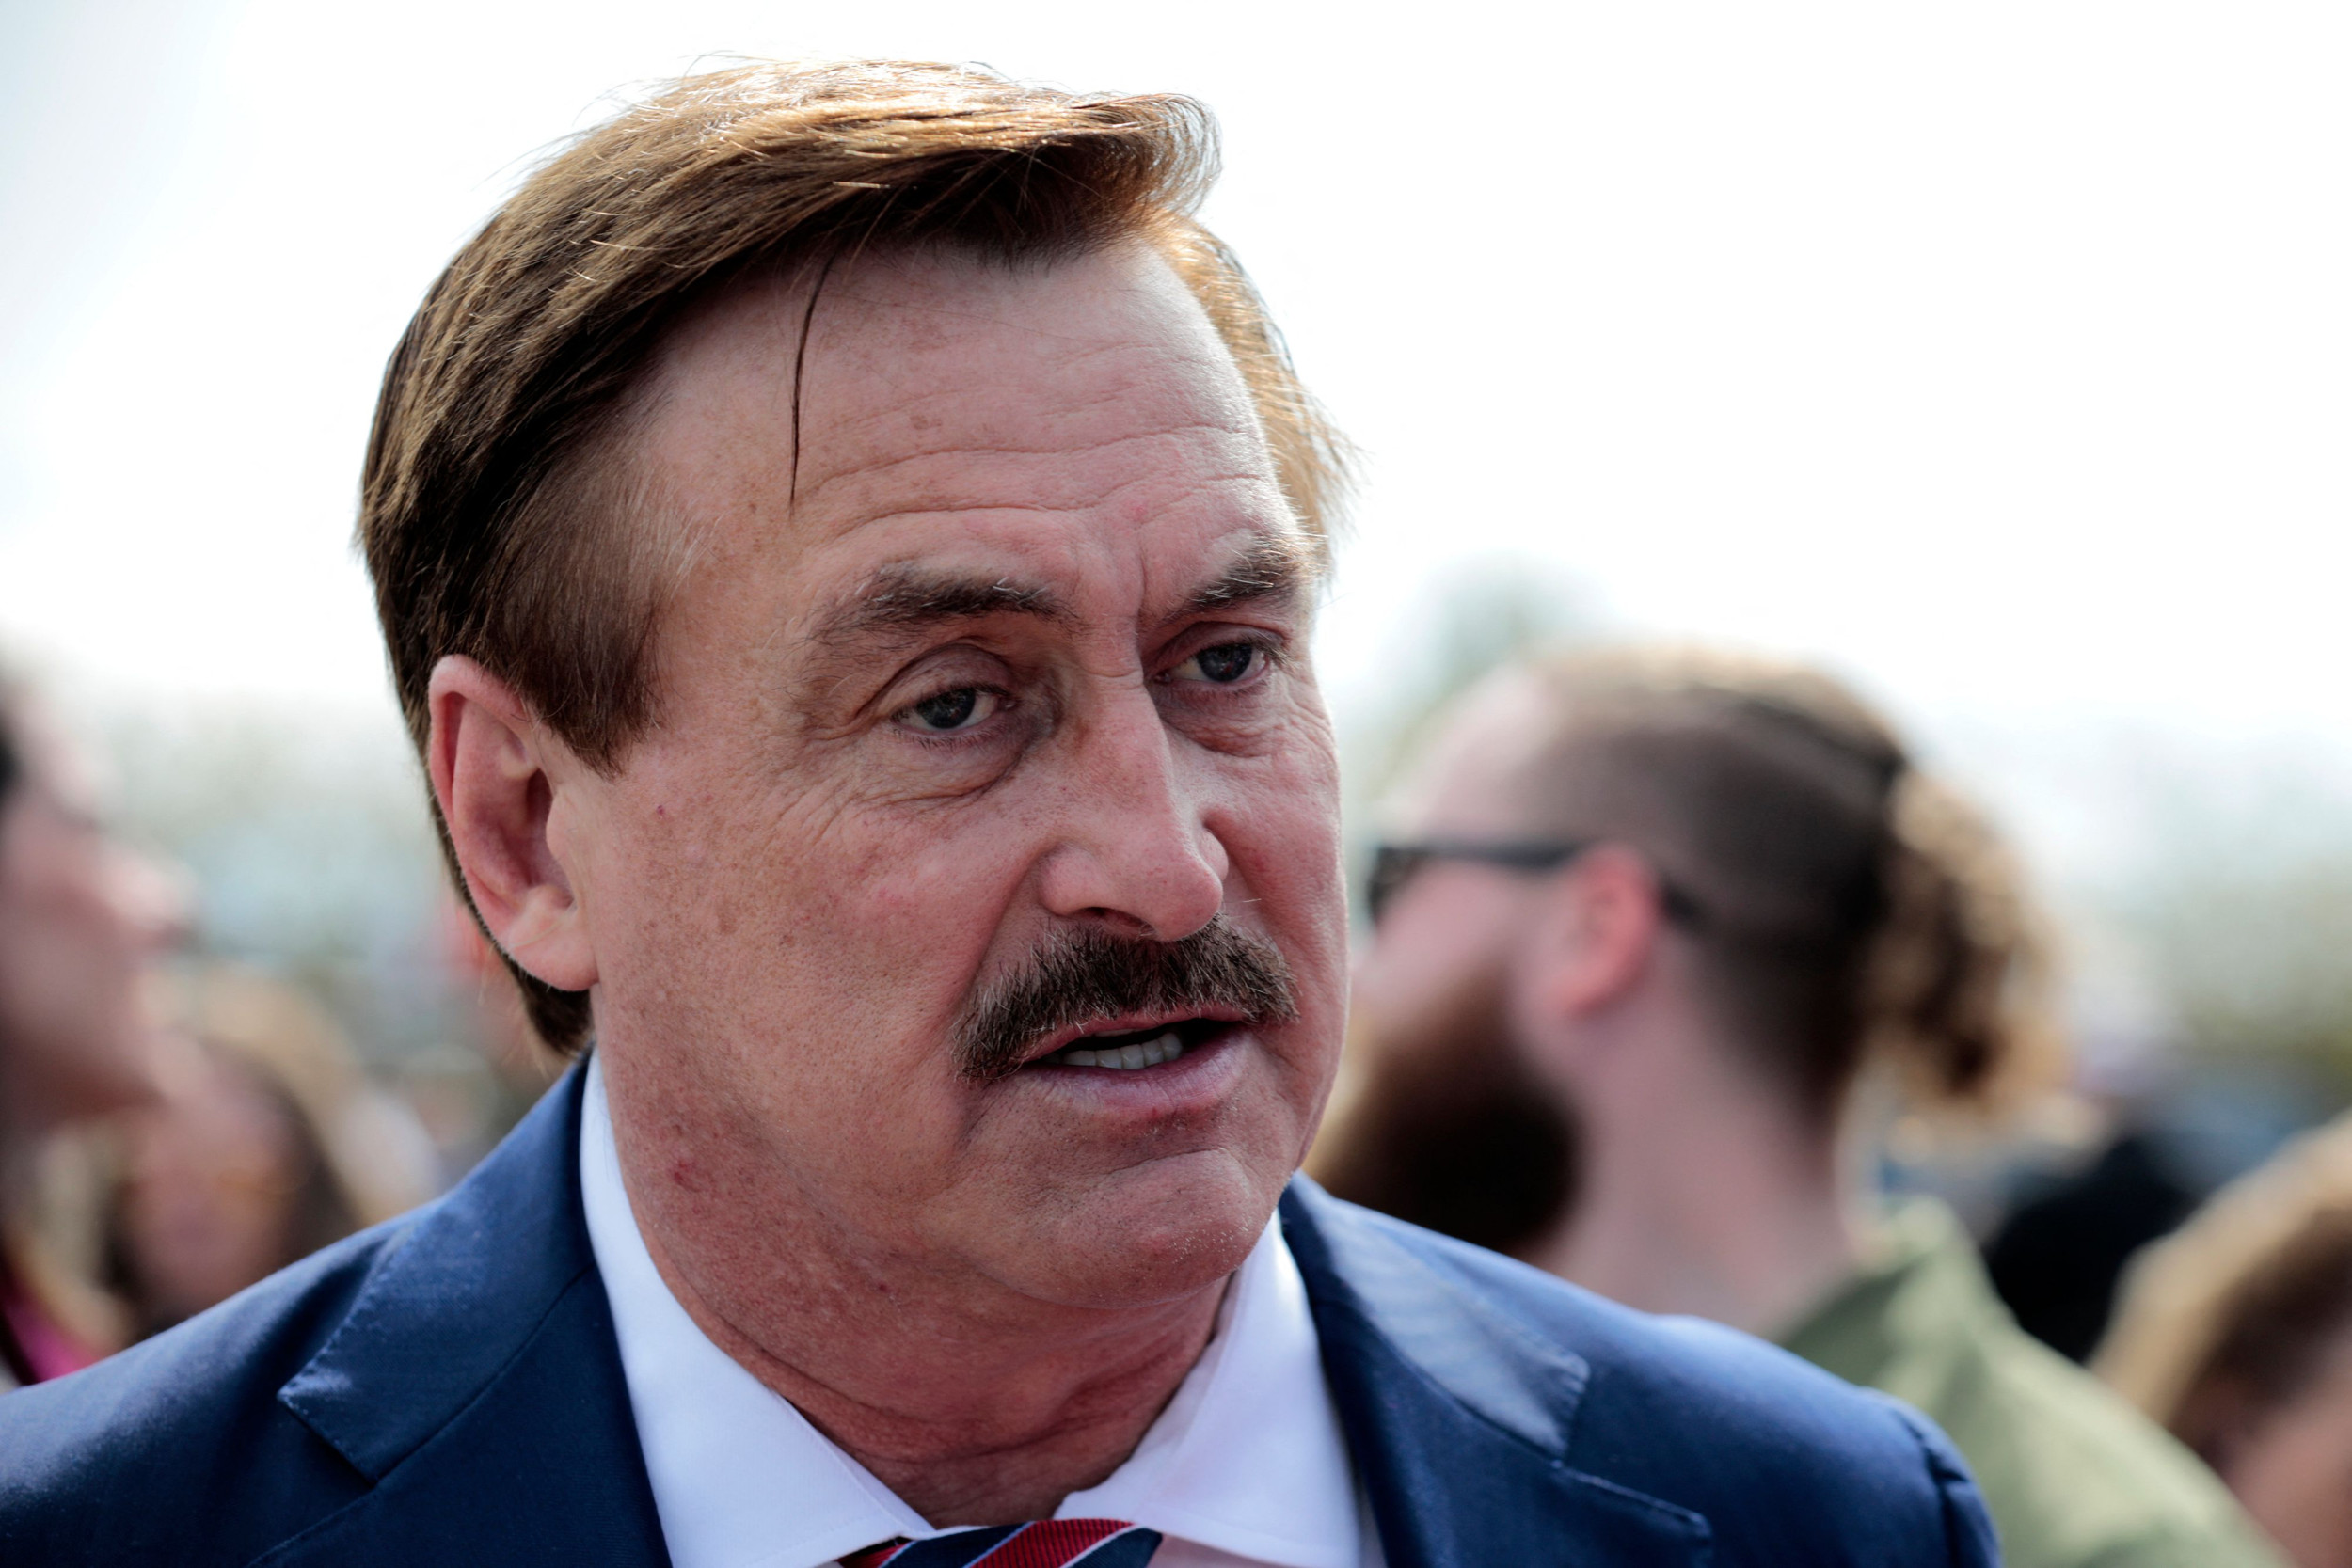 mike lindell drops his phone lawsuit